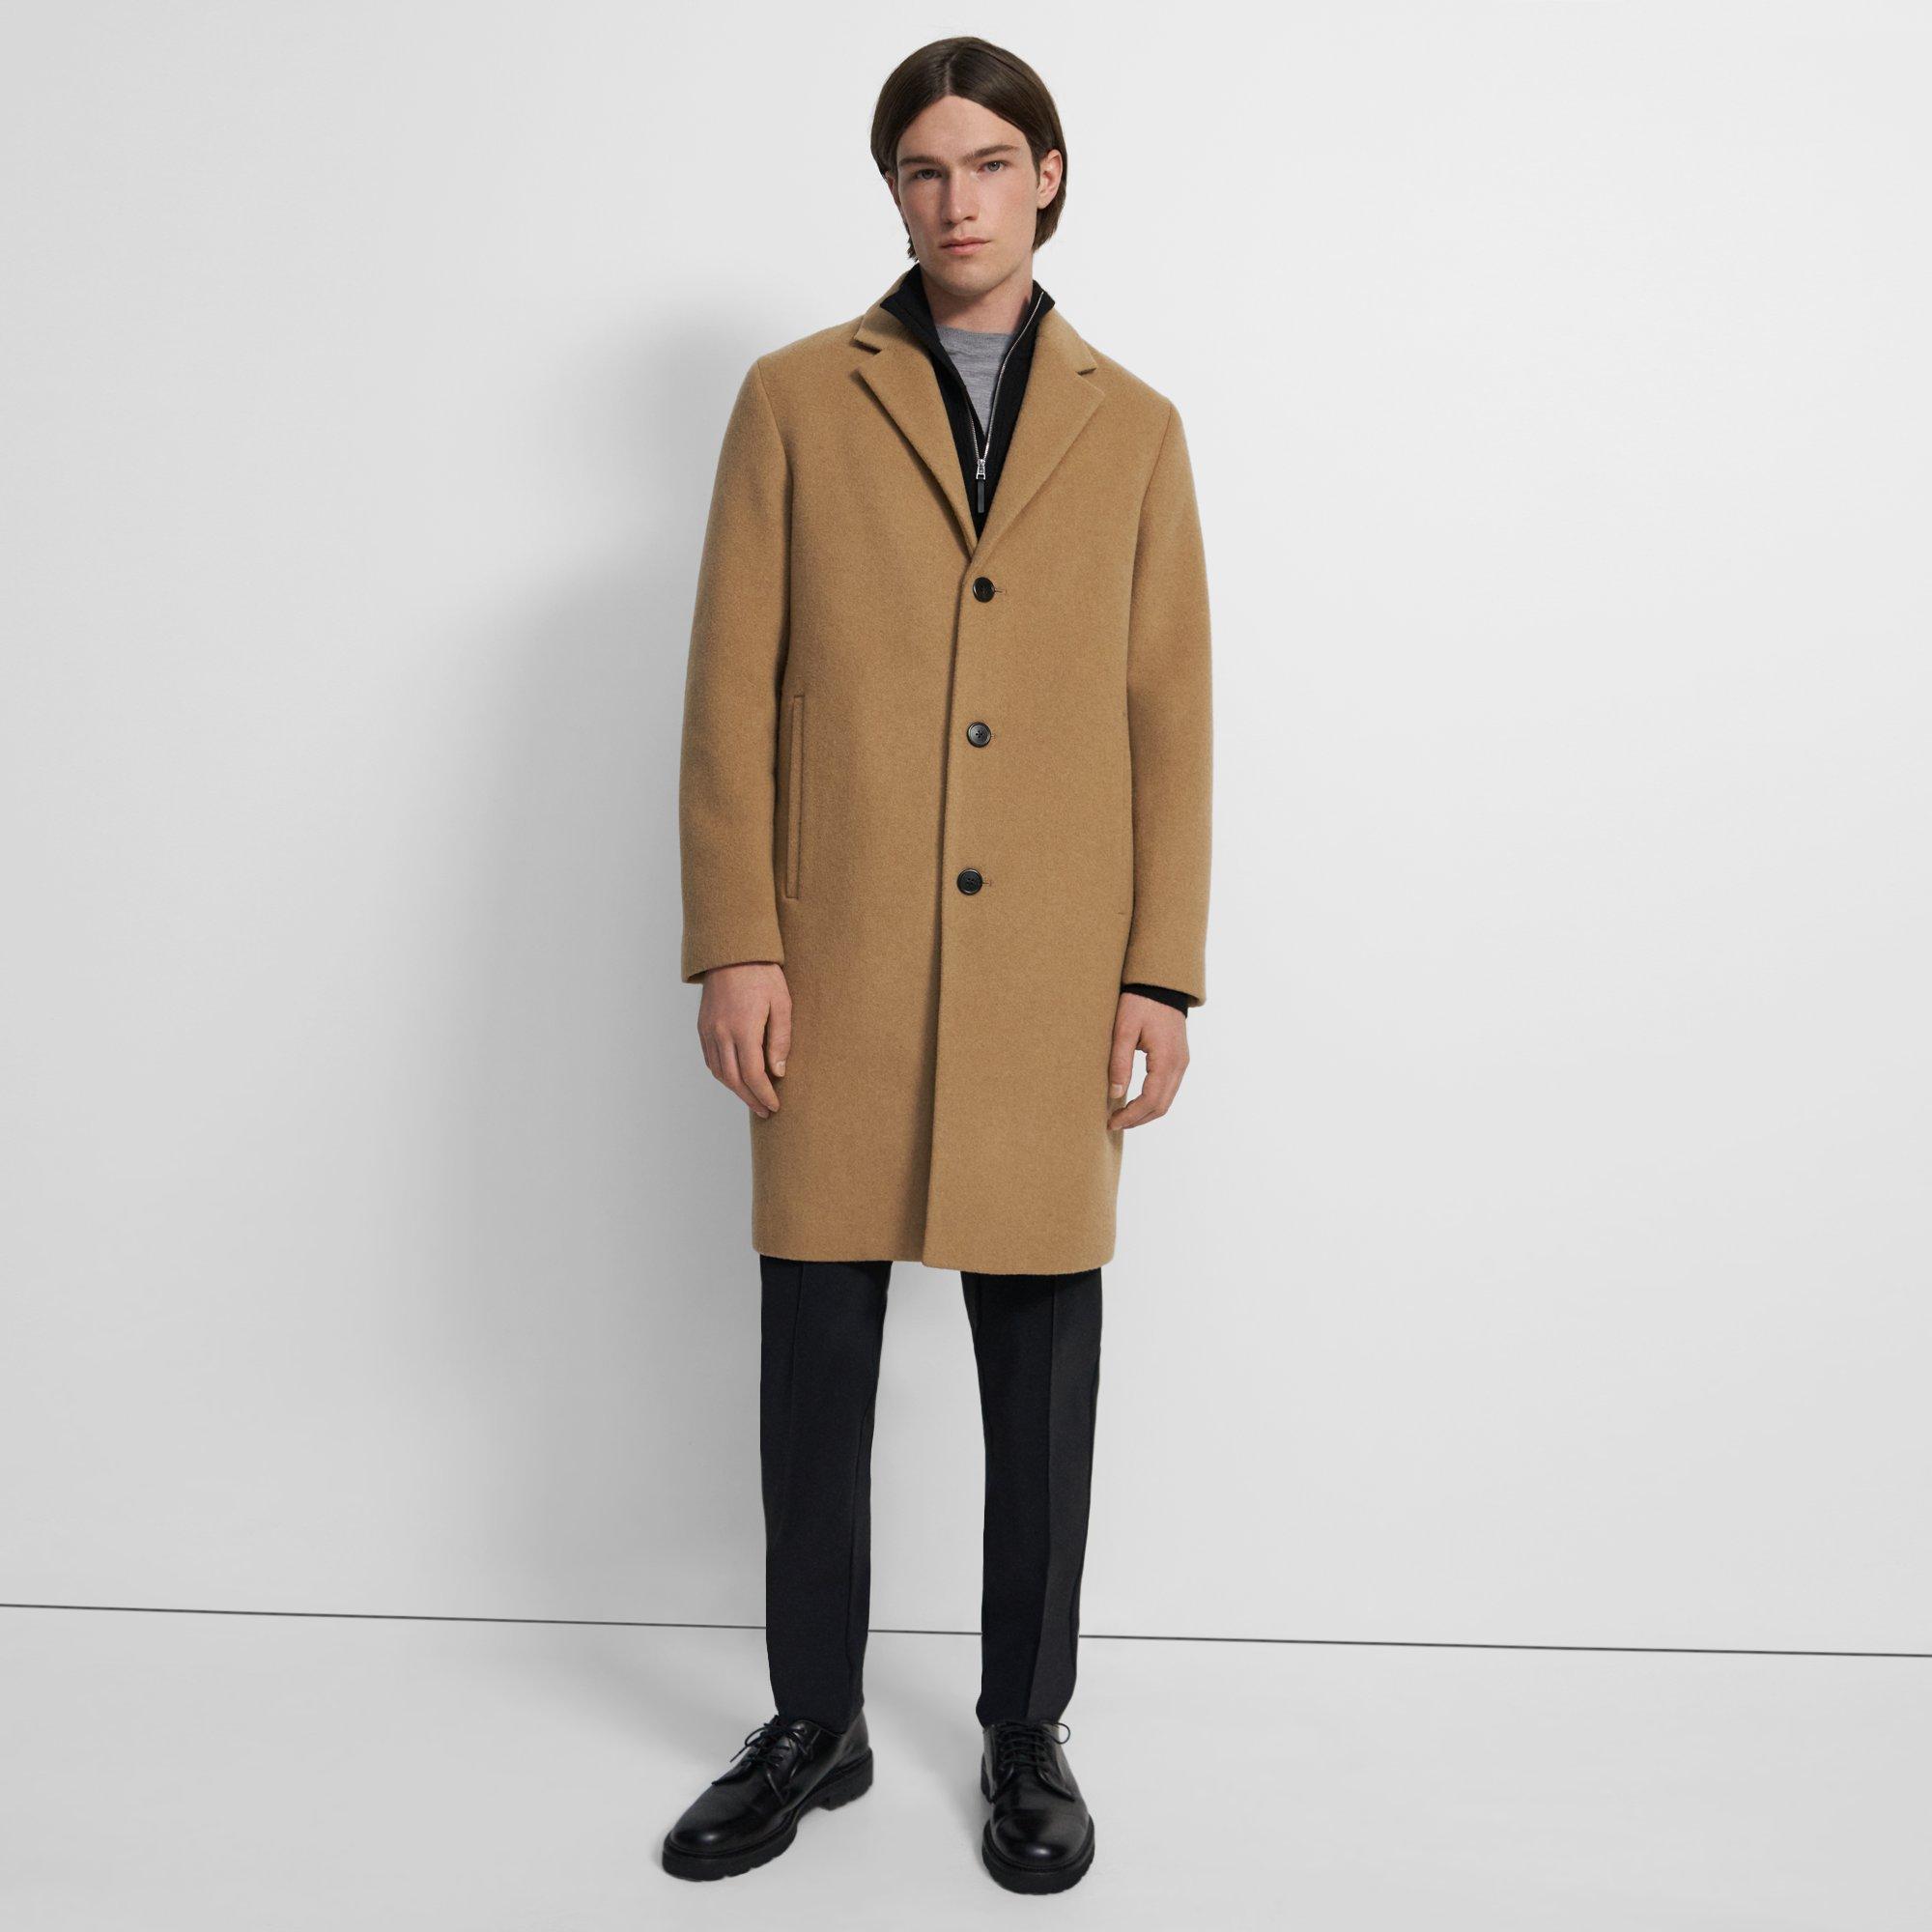 Men's Sweaters and Outerwear | Theory